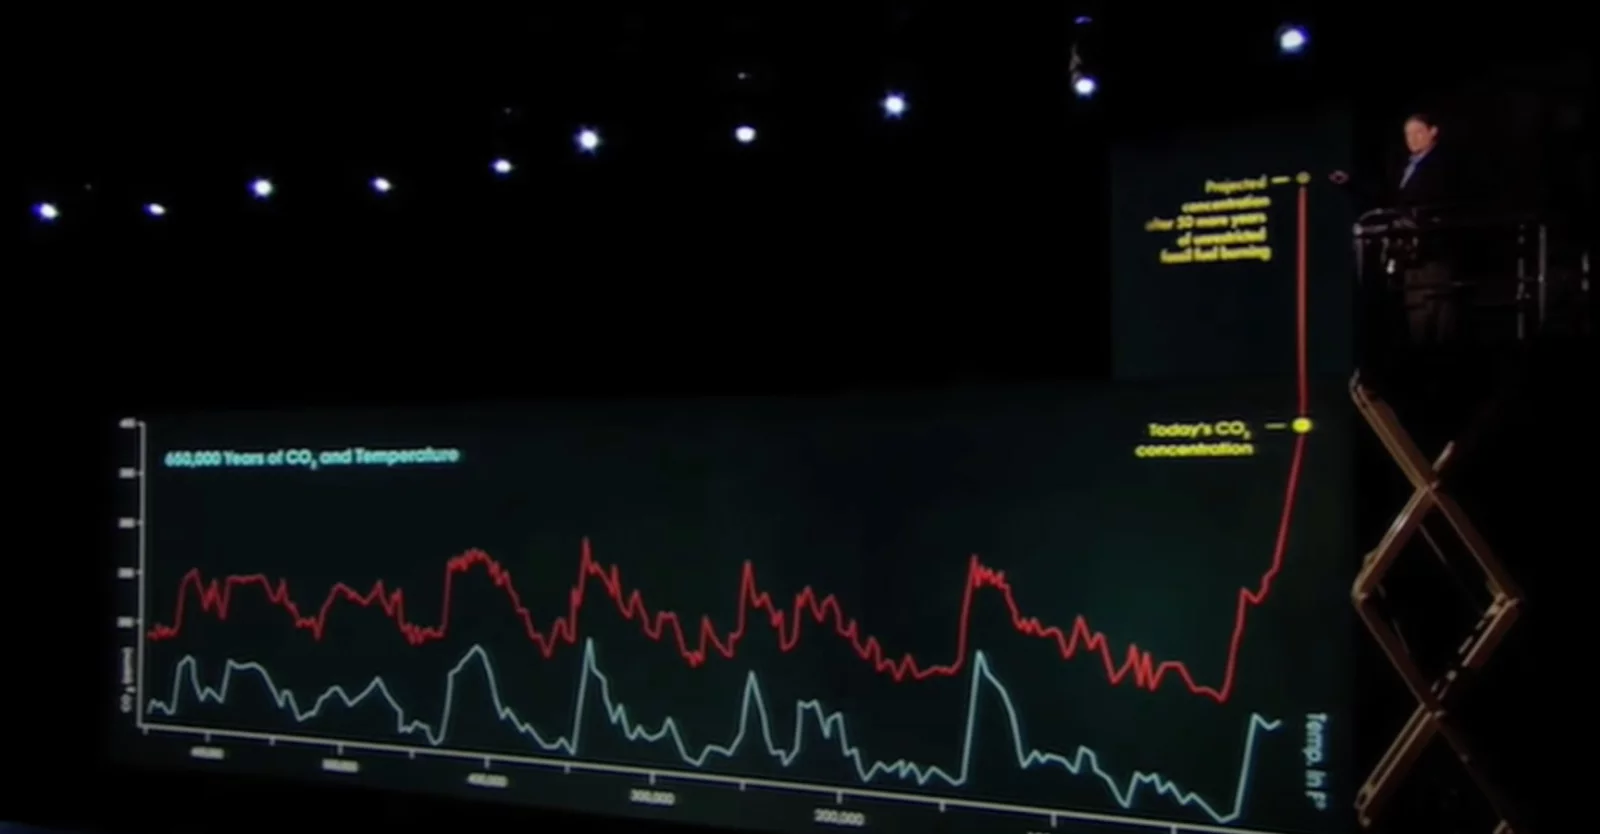 The hockey stick graph, based on research from Michael Mann and other scientists, helped make global warming accessible to a wide audience. It was featured in part in the documentary An Inconvenient Truth. The graph also became a target for climate deniers. Photo: Paramount / Screenshot by NPR